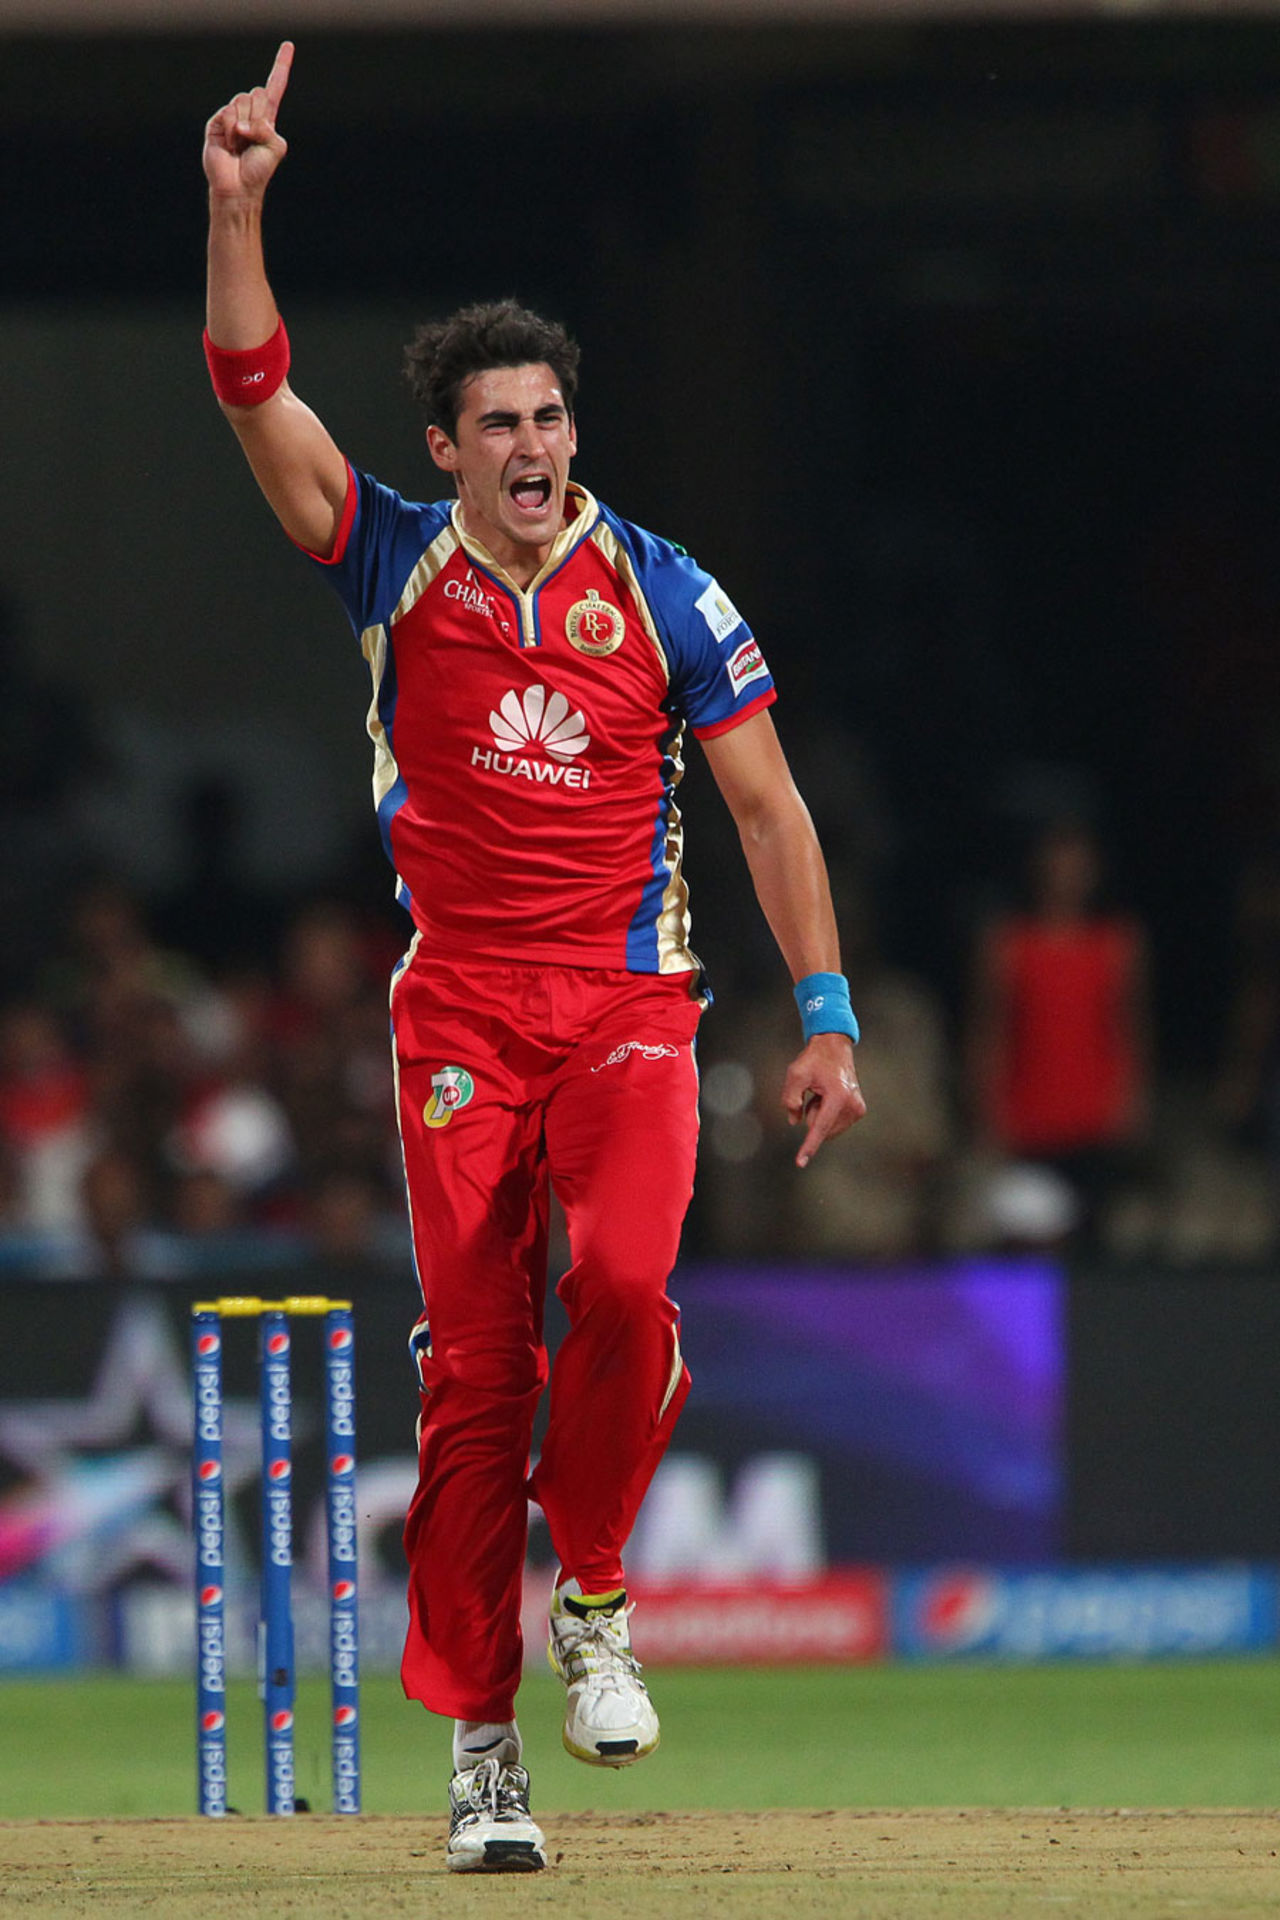 Mitchell Starc exults after a wicket, Royal Challengers Bangalore v Delhi Daredevils, IPL 2014, Bangalore, May 13, 2014